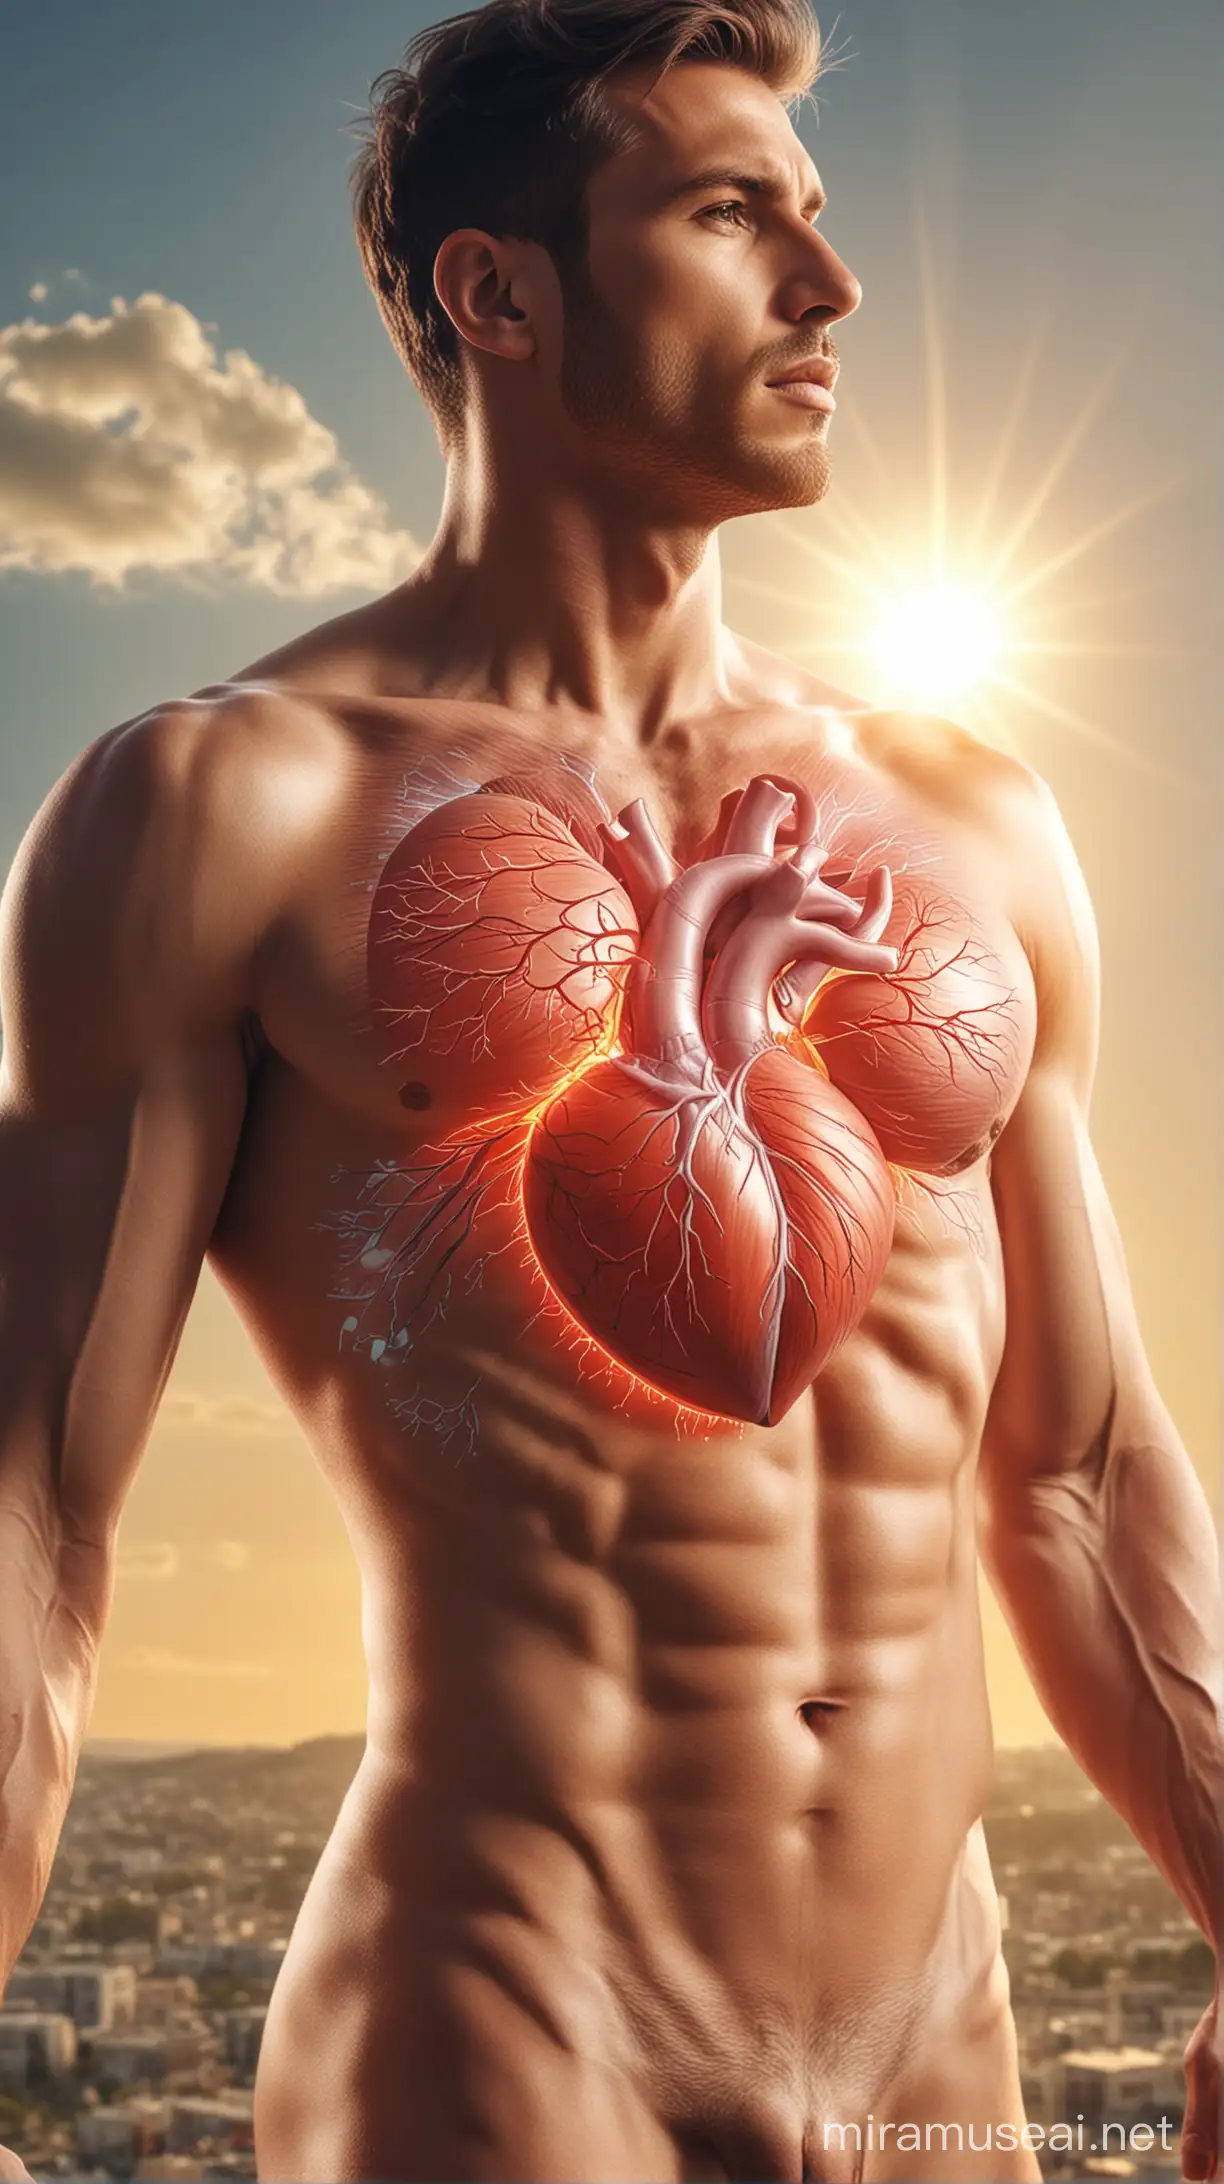 Mans Heart Health Diagram on Natural Background with Sunlight Effects